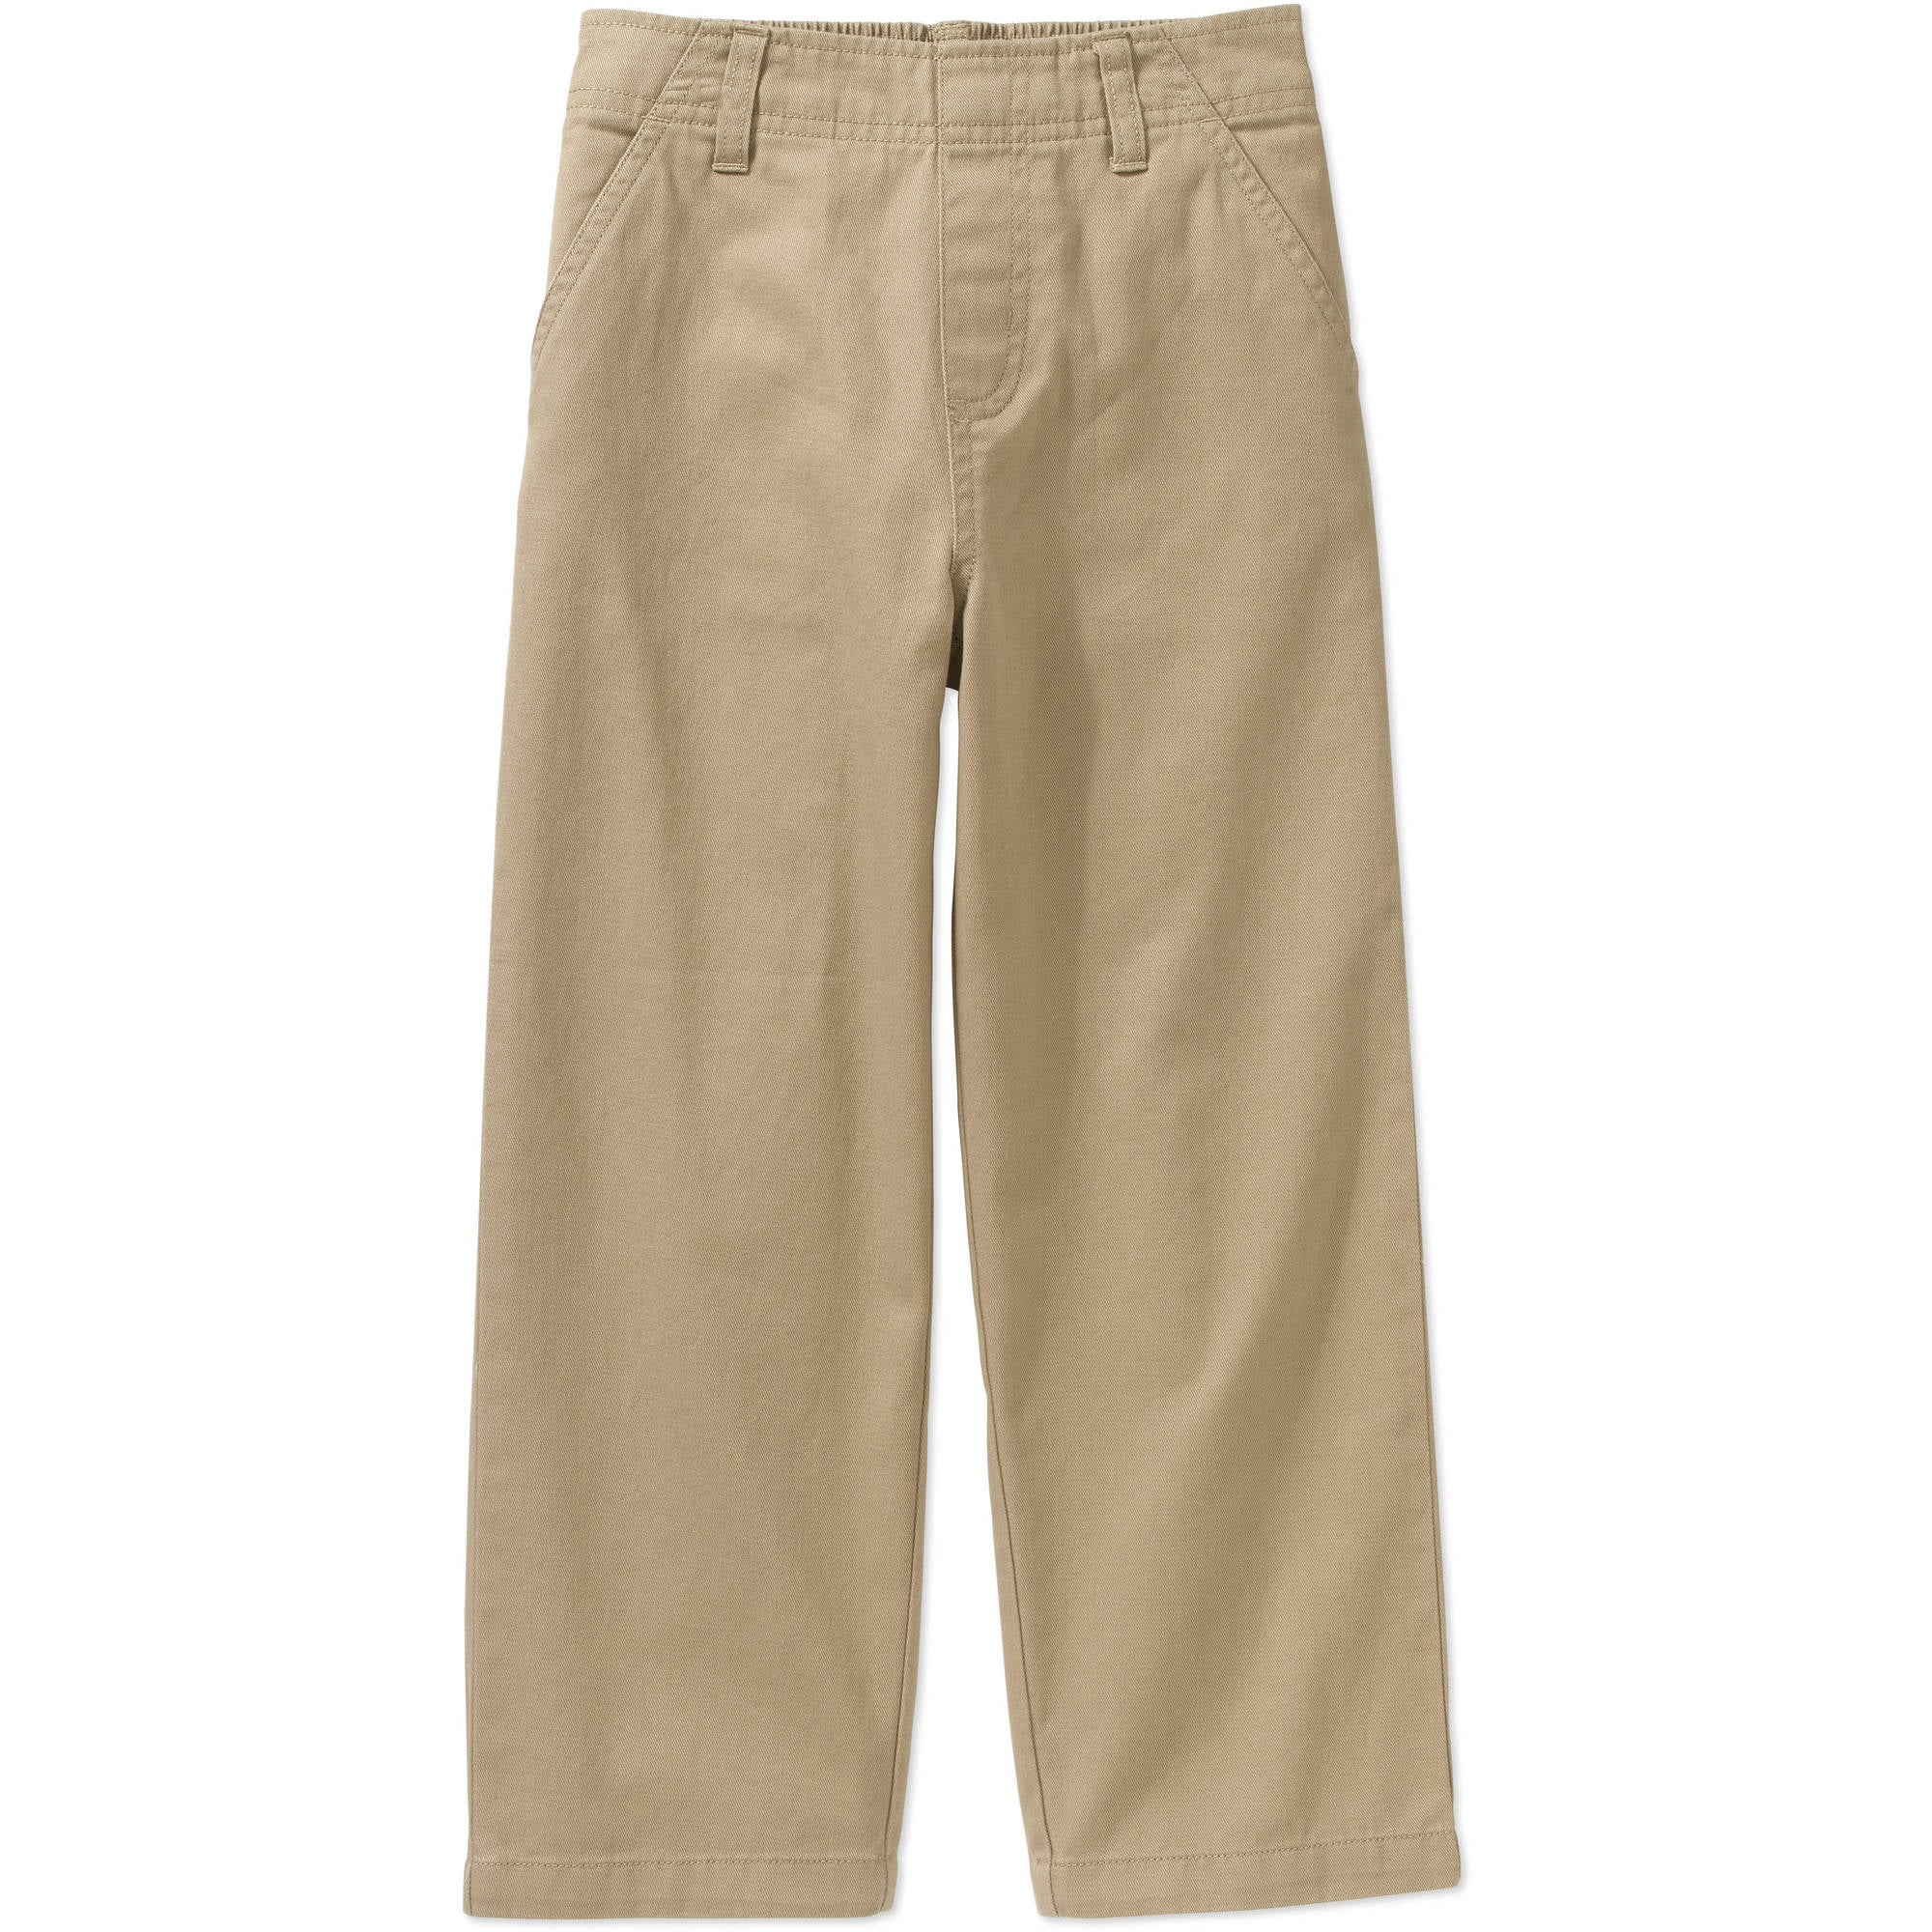 2-pack Boys size 6 365 Kids from Garanimals Solid Woven Chino stretch Pants